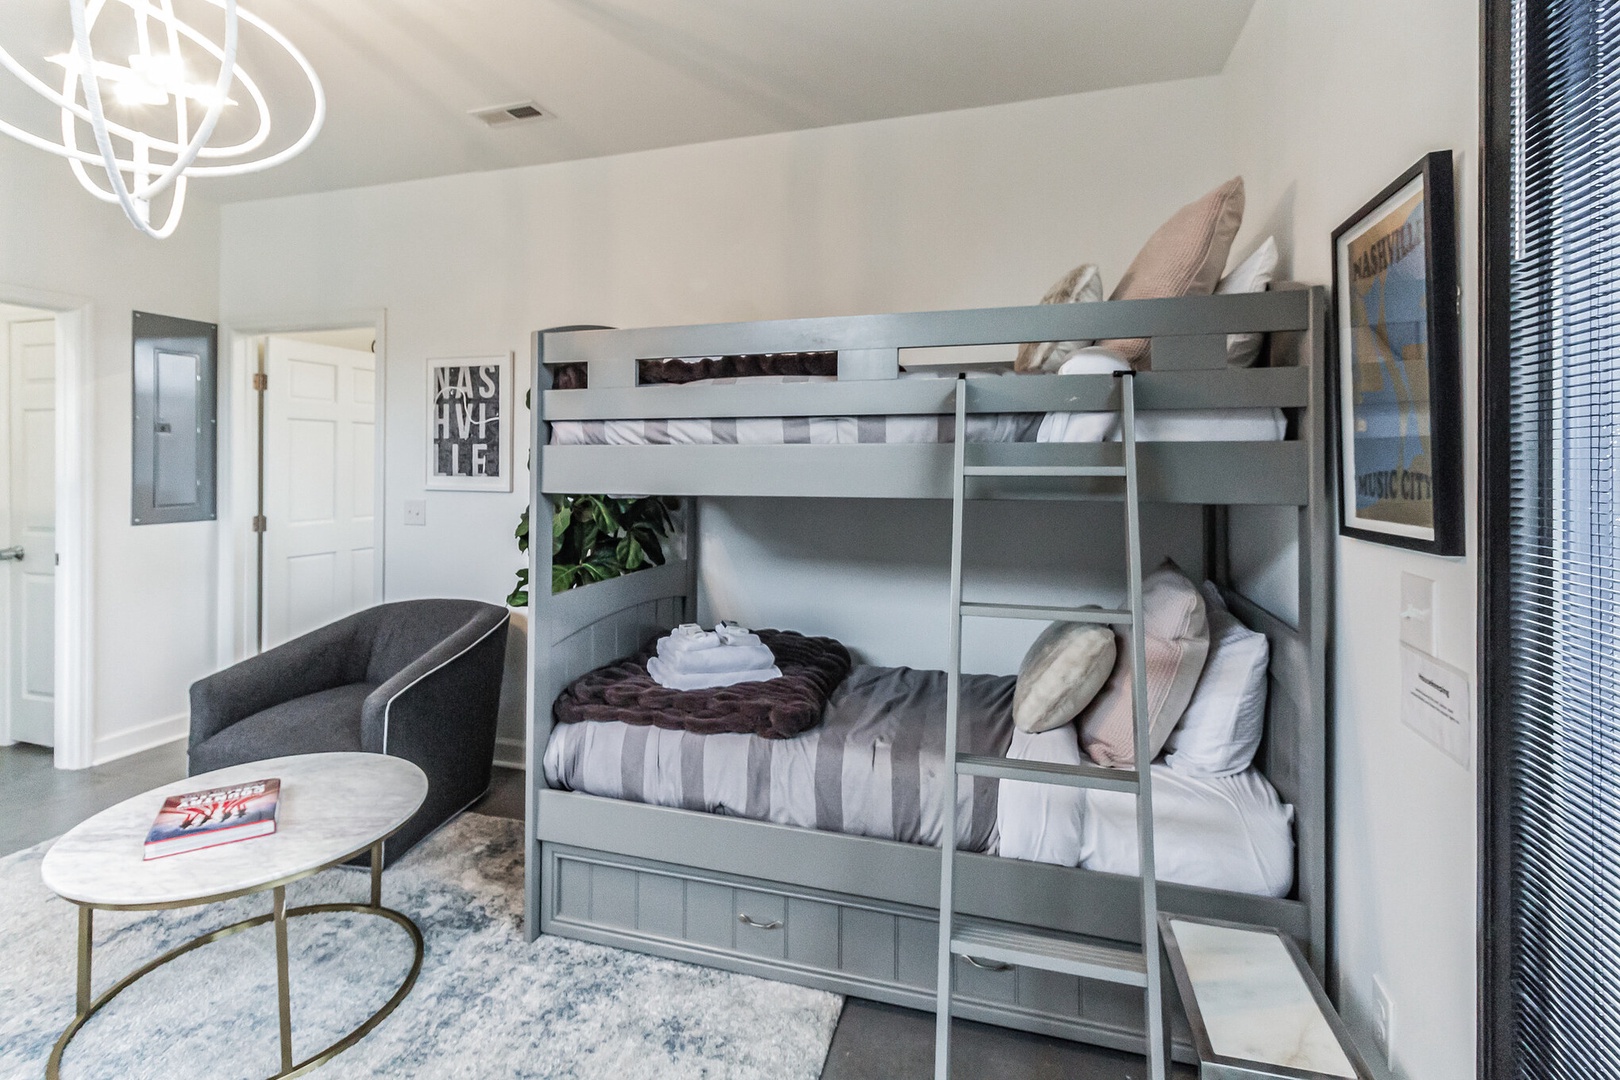 The chic first floor common area offers a twin-over-twin bunkbed